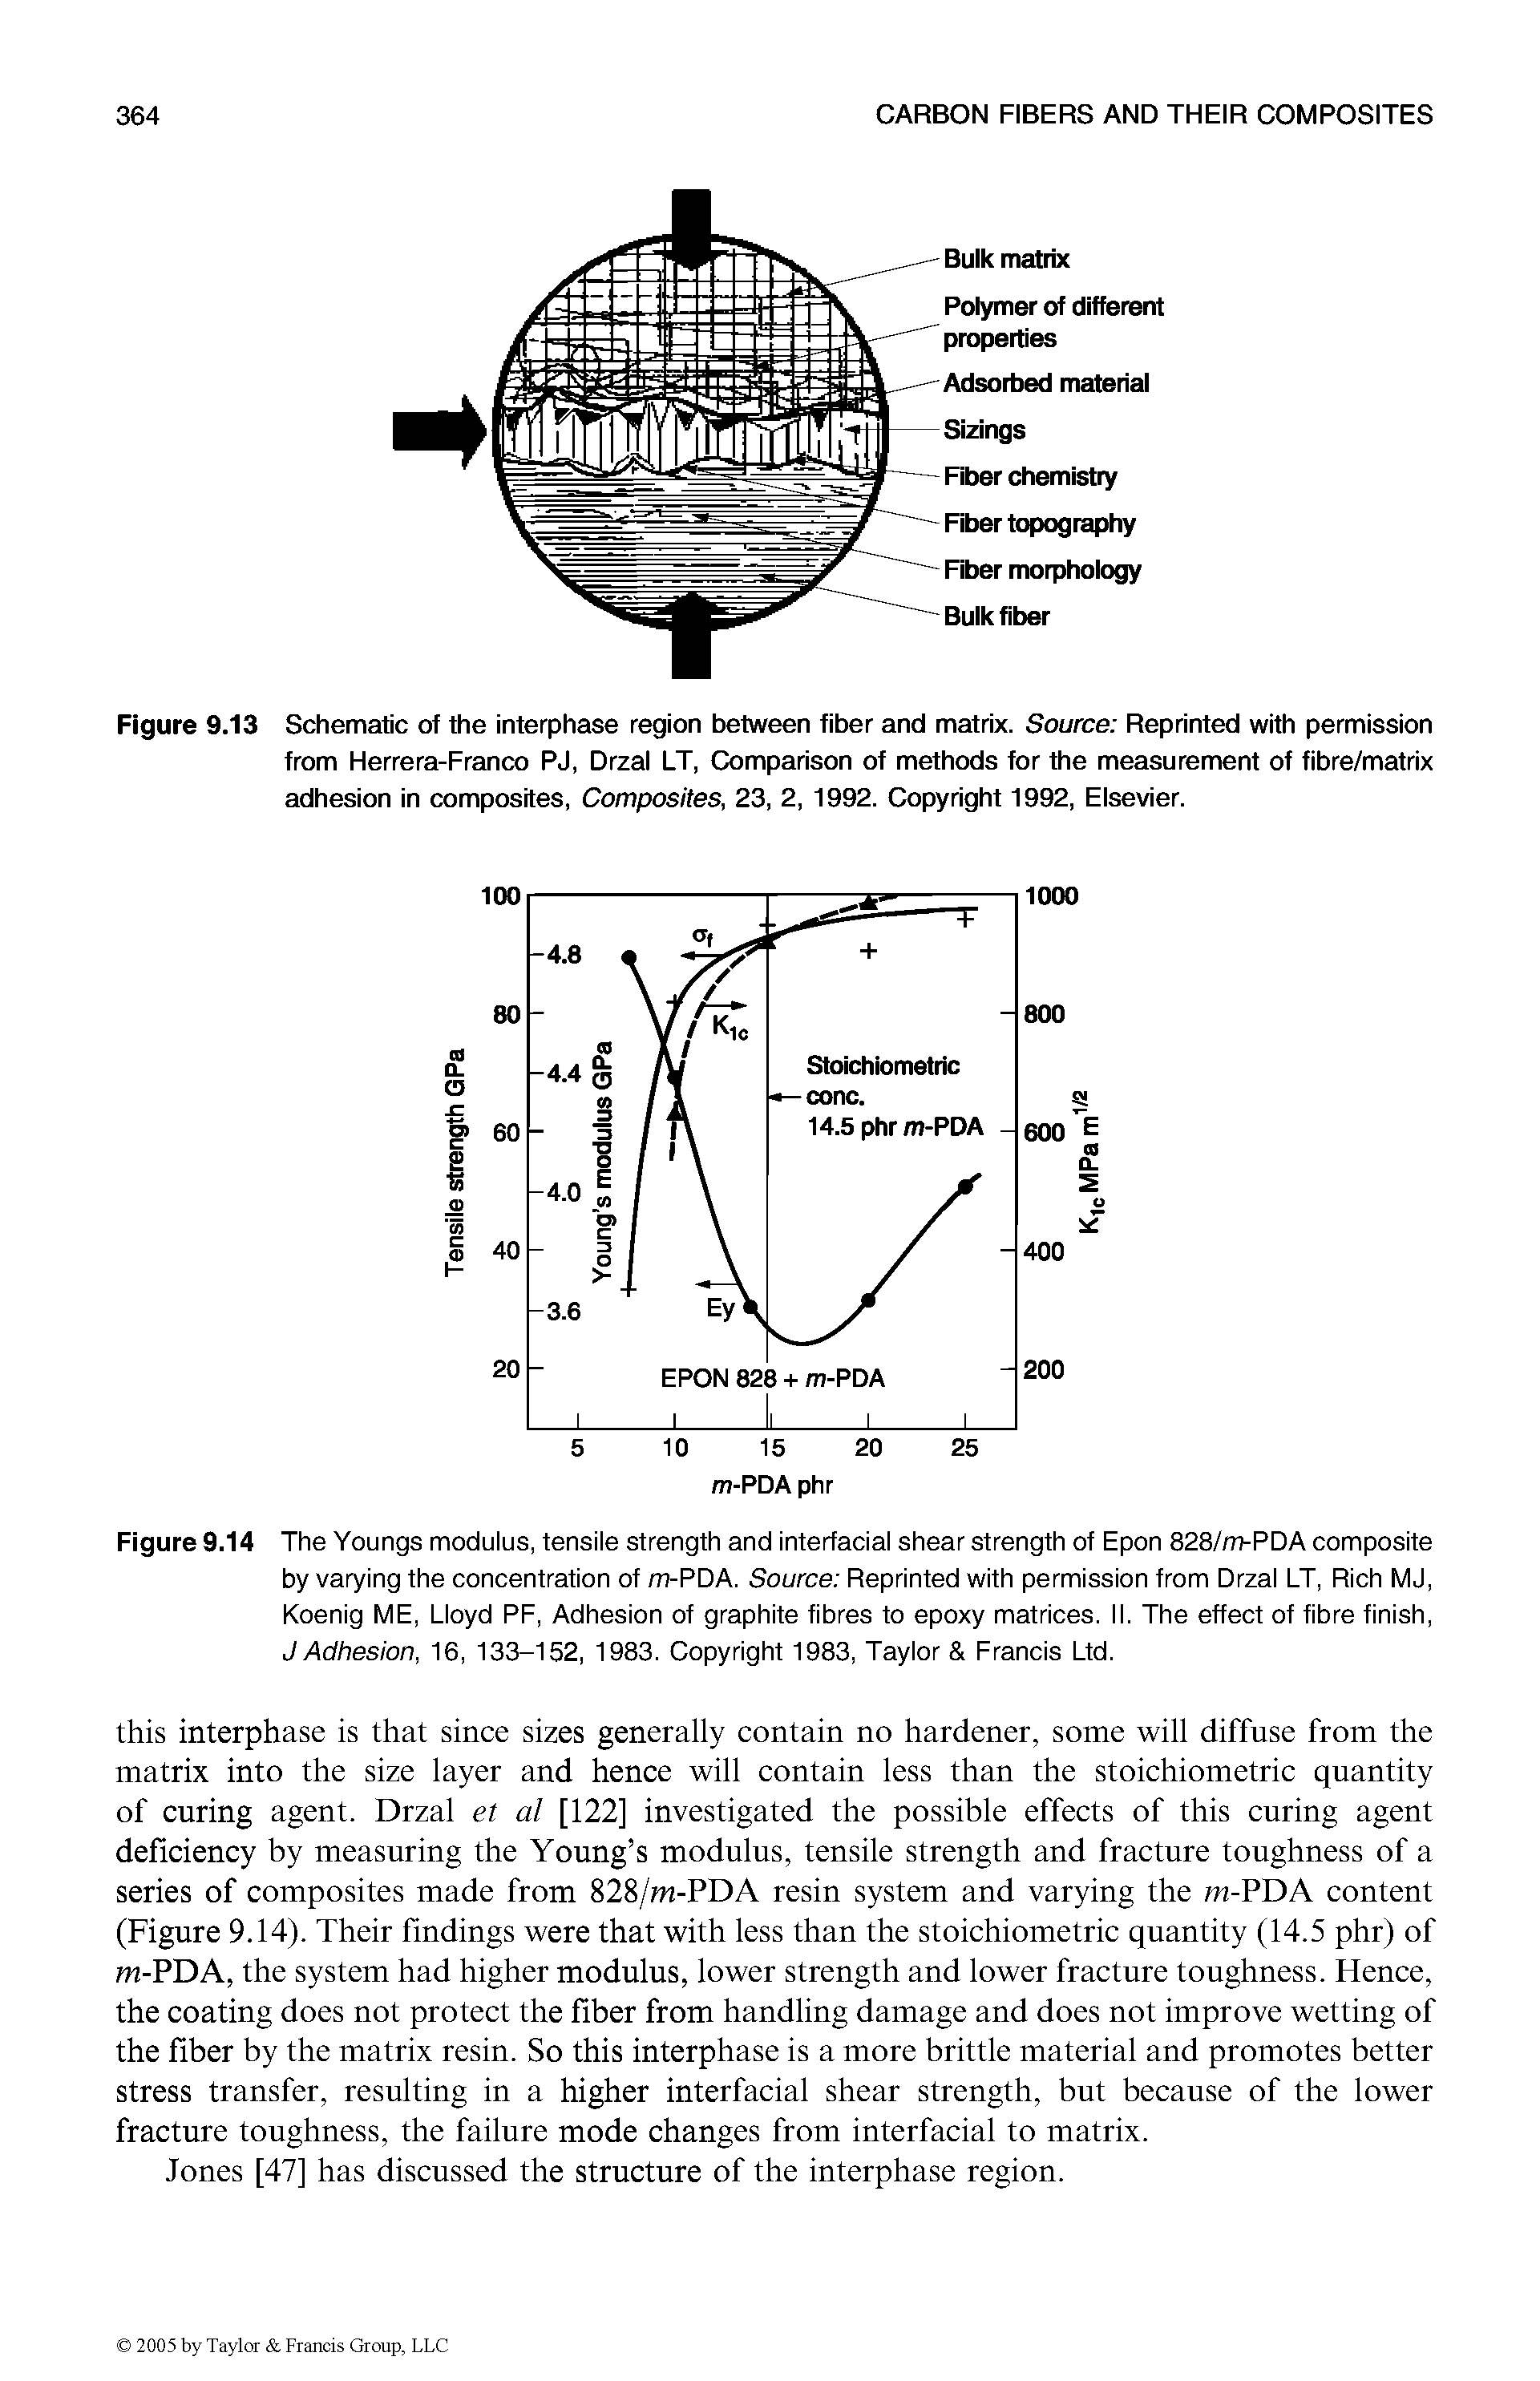 Figure 9.13 Schematic of the interphase region between fiber and matrix. Source Reprinted with permission from Herrera-Franco PJ, Drzal LT, Comparison of methods for the measurement of fibre/matrix adhesion in composites, Composites, 23, 2,1992. Copyright 1992, Elsevier.